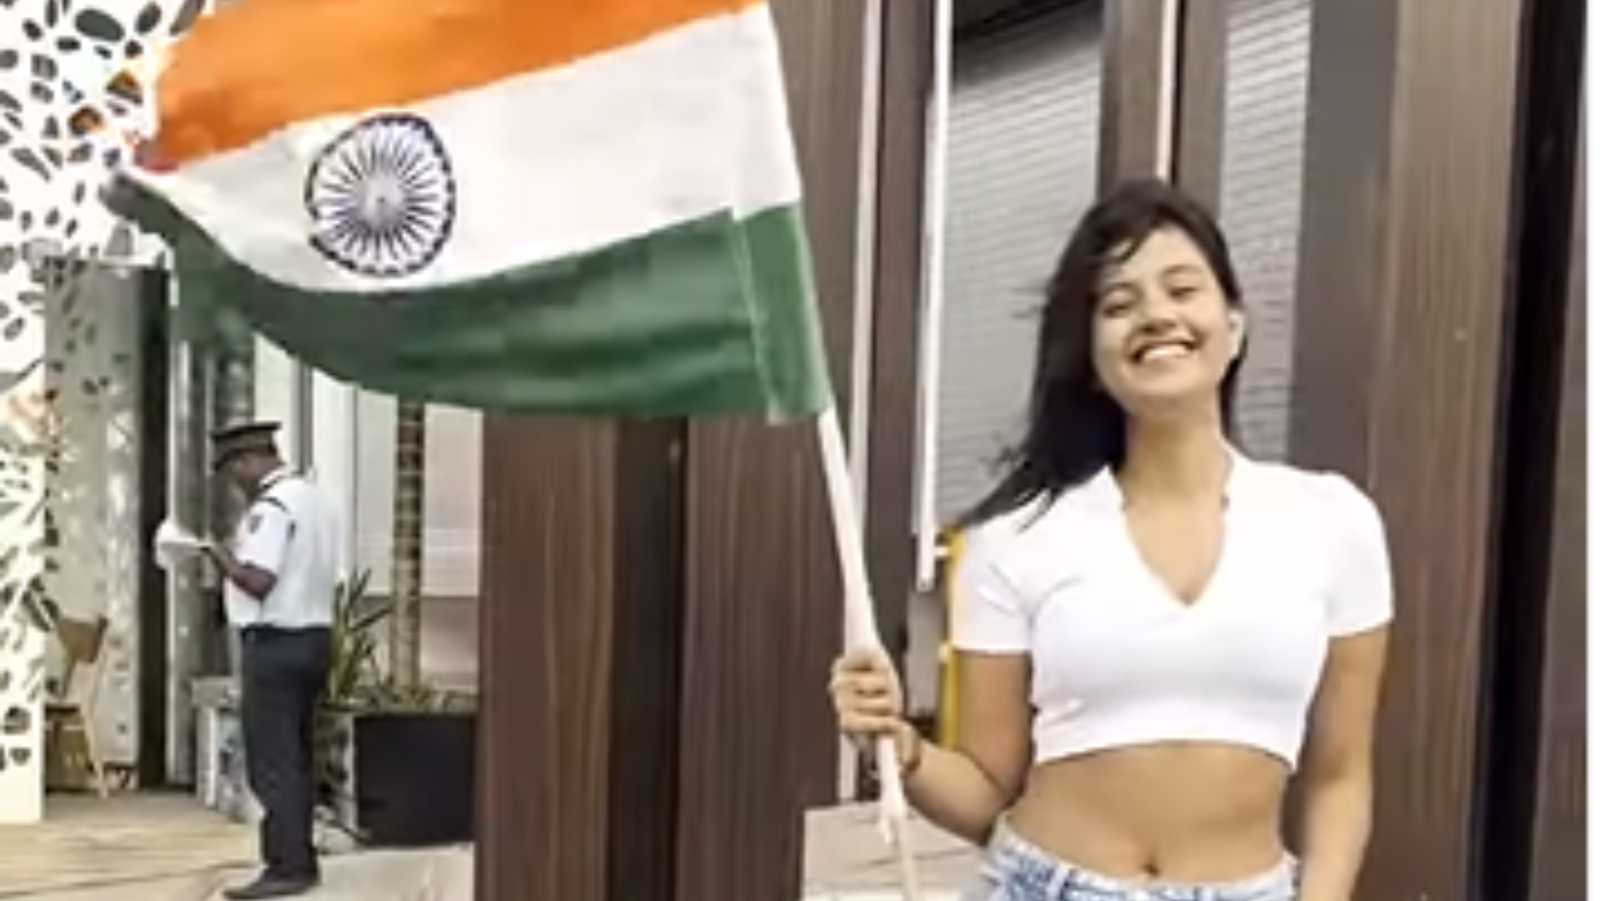 'This is disrespect of Indian flag' : Anjali Arora gets brutally trolled for her choice of outfit while waving the National Flag